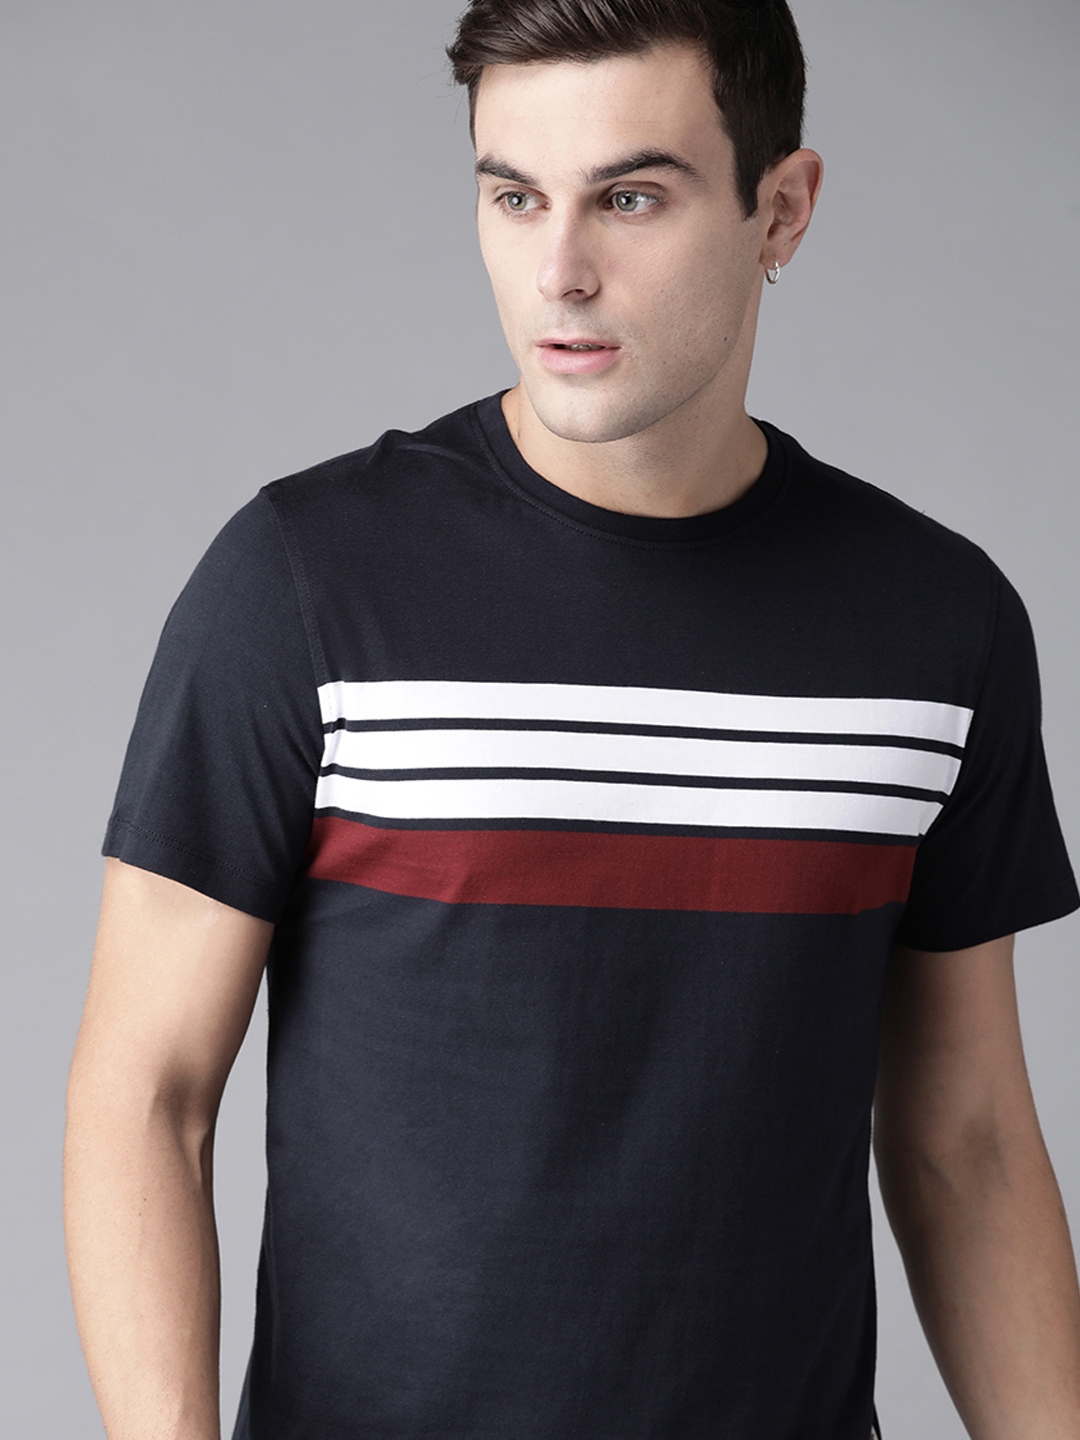 Buy The Roadster Lifestyle Co Men Navy Blue & White Striped Round Neck ...